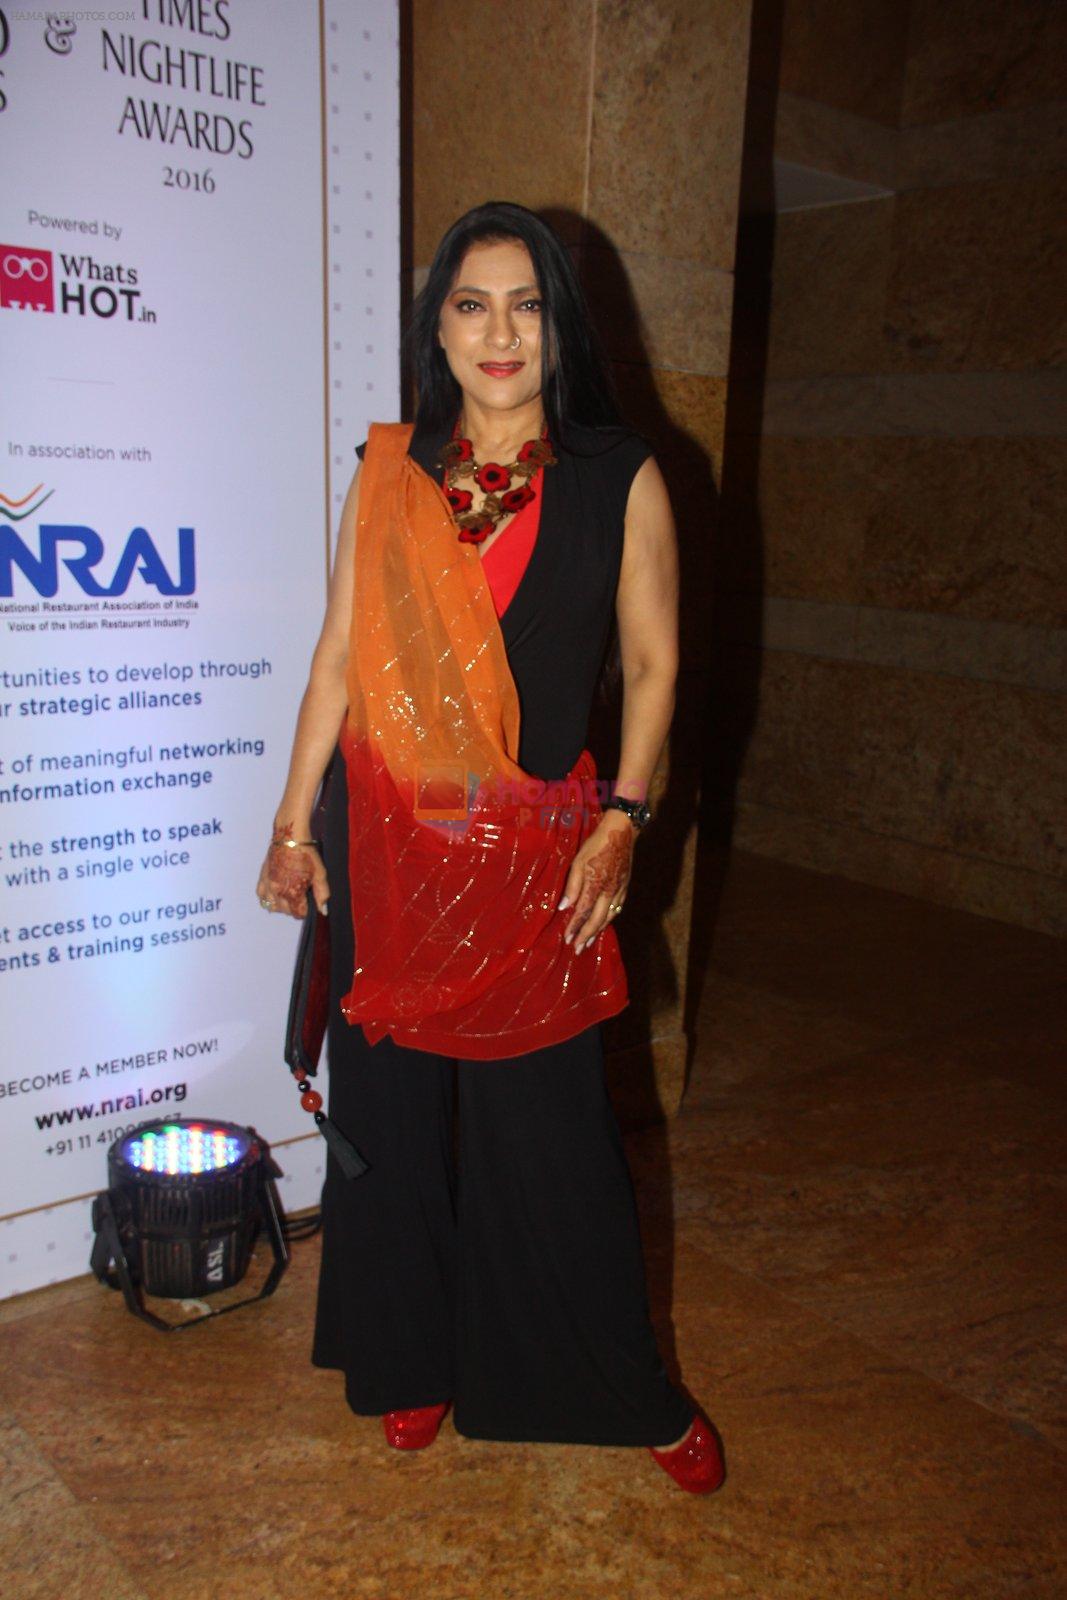 Aarti Surendranath at Times Food Awards on 15th March 2016